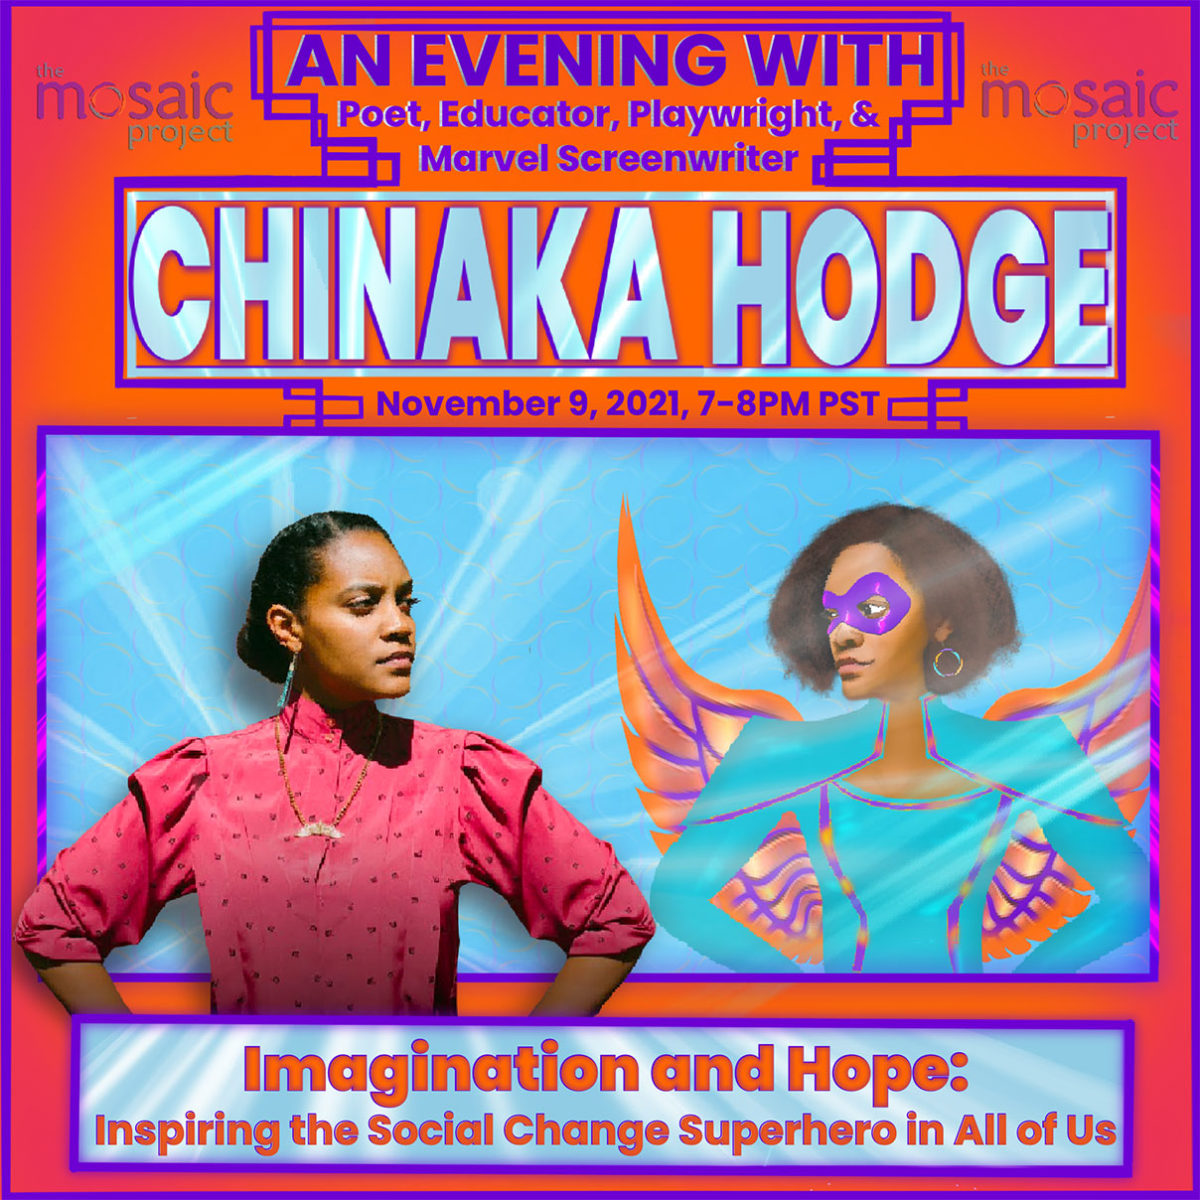 An Evening With Chinaka Hodge